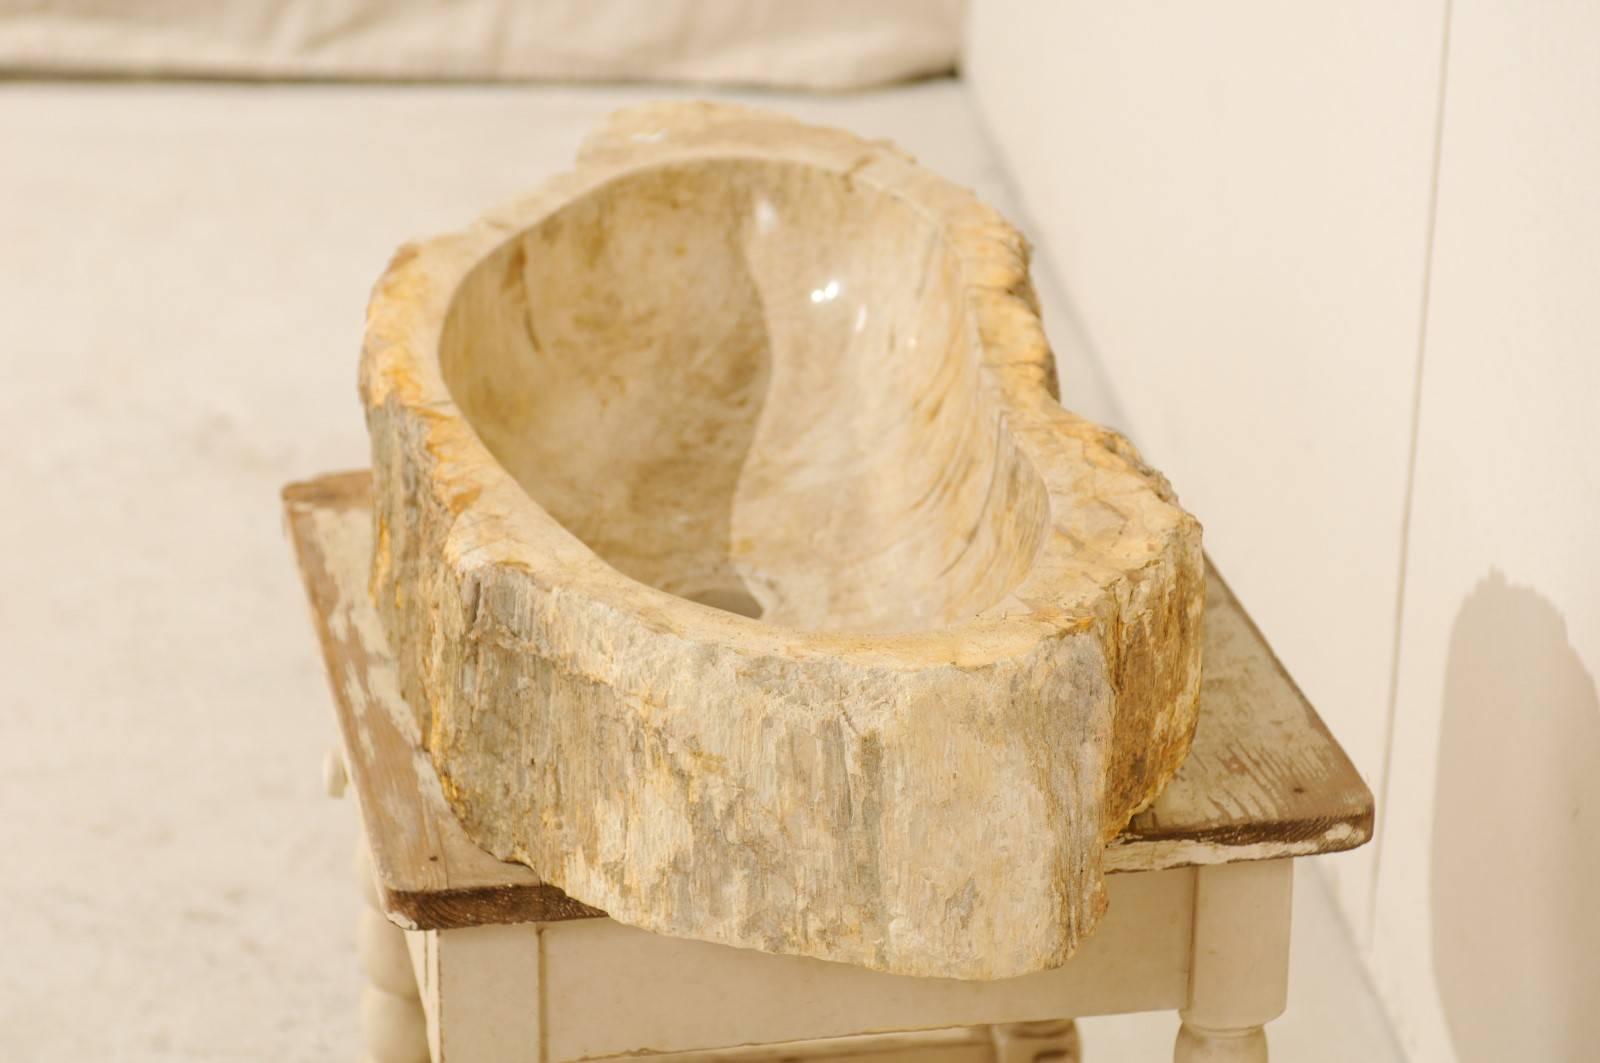 A cream and beige color petrified wood sink. This petrified wood sink features an oblong shape. The sink is primarily cream and beige with some warmer veining and spots throughout. The interior of the sink has been polished and the surround has been